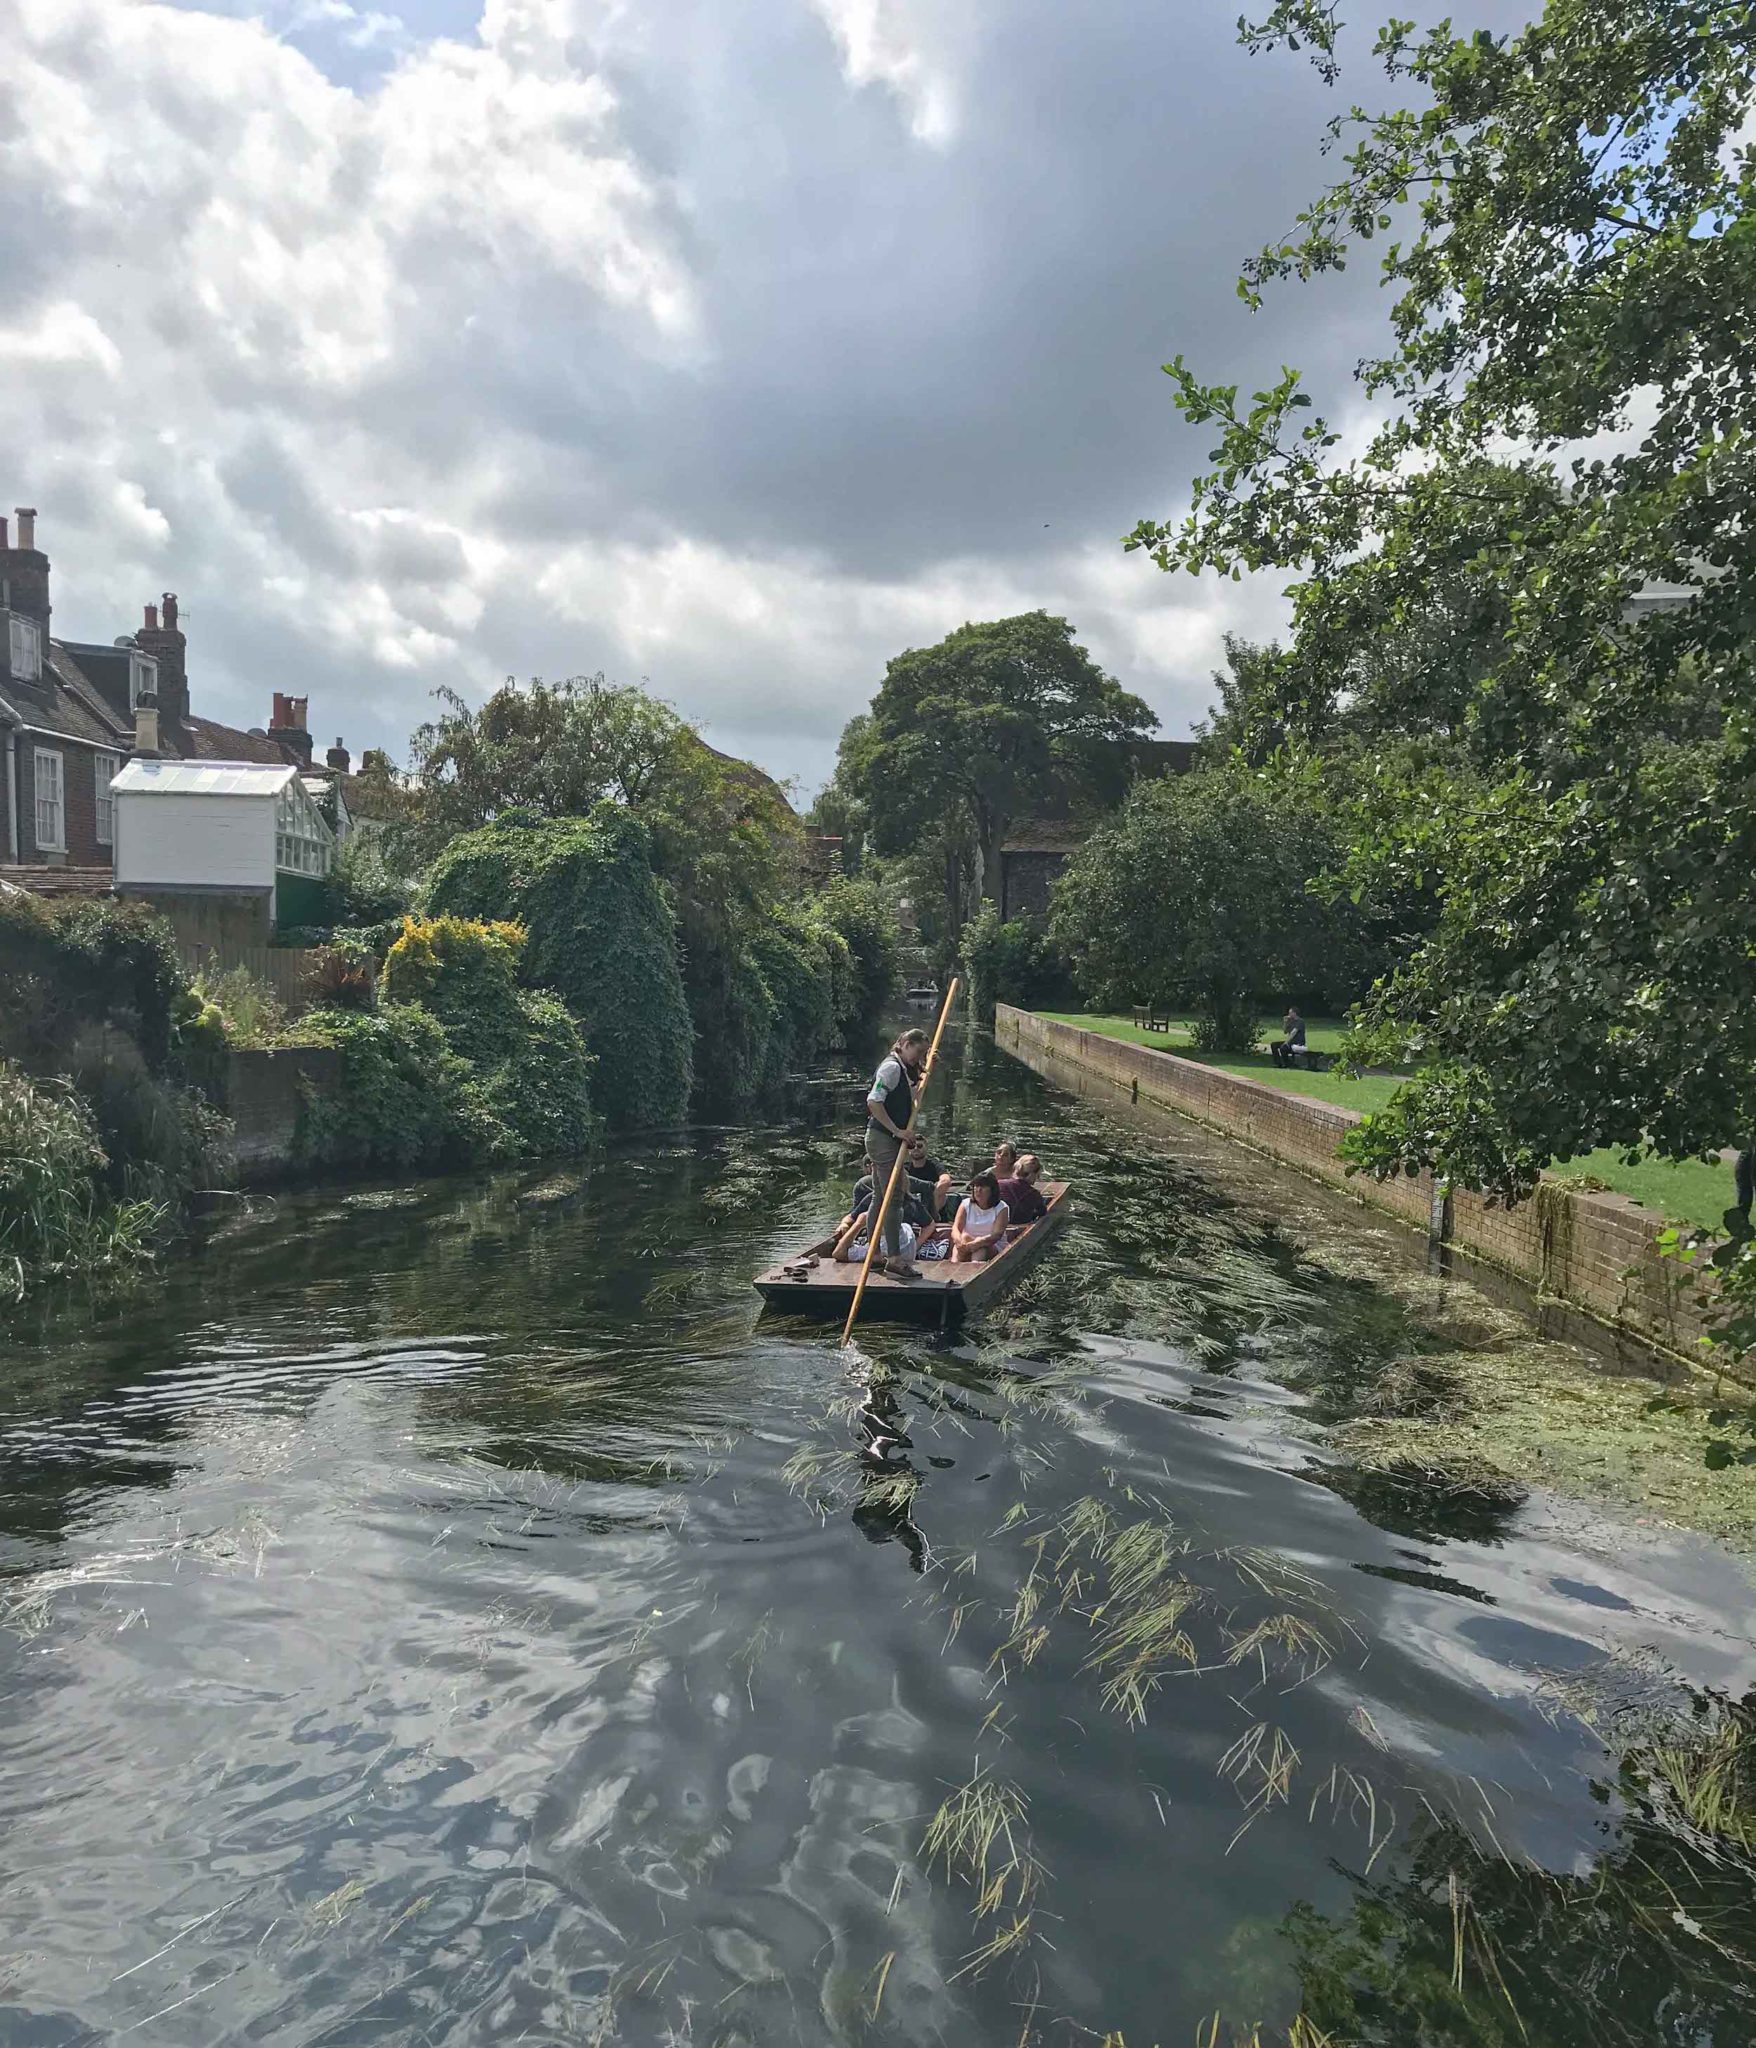 punting on the river is one of the best things to do in Canterbury